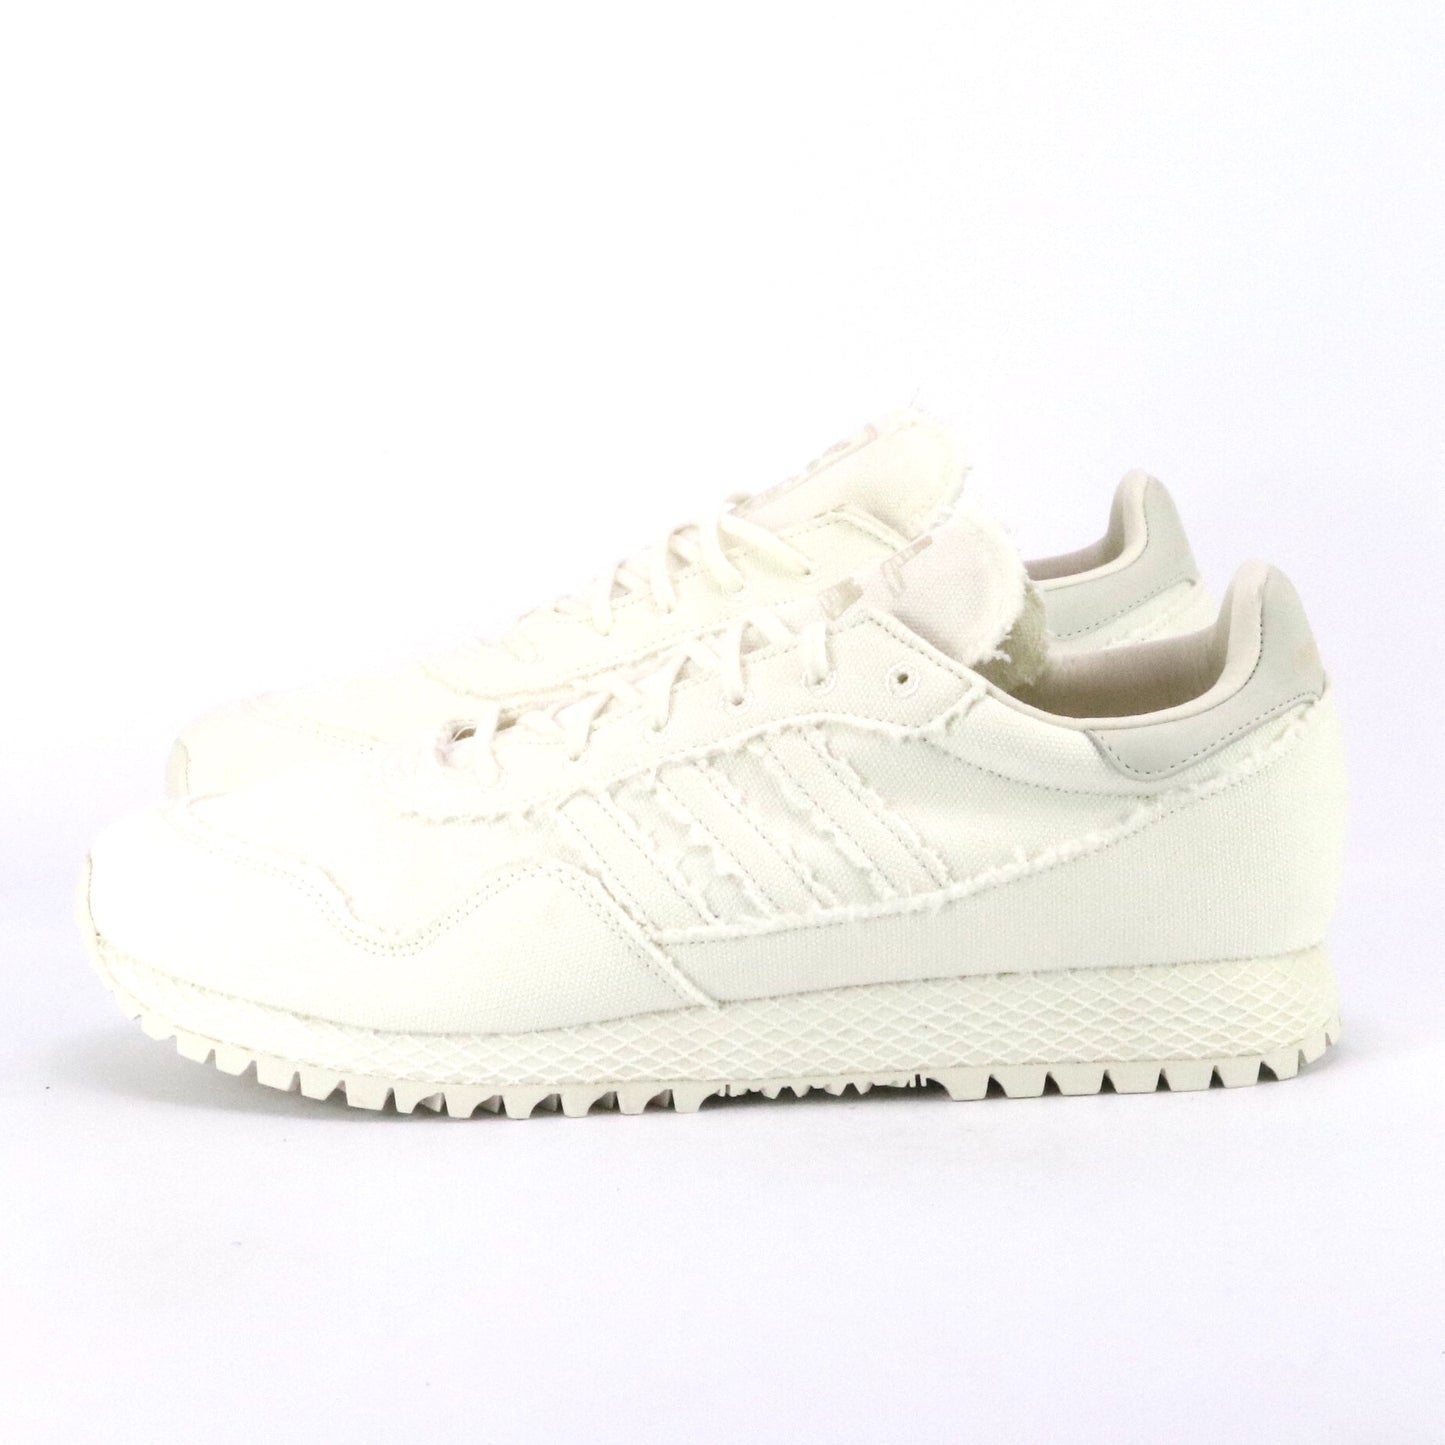 Adidas EQT Support Ultra PK Vintage White